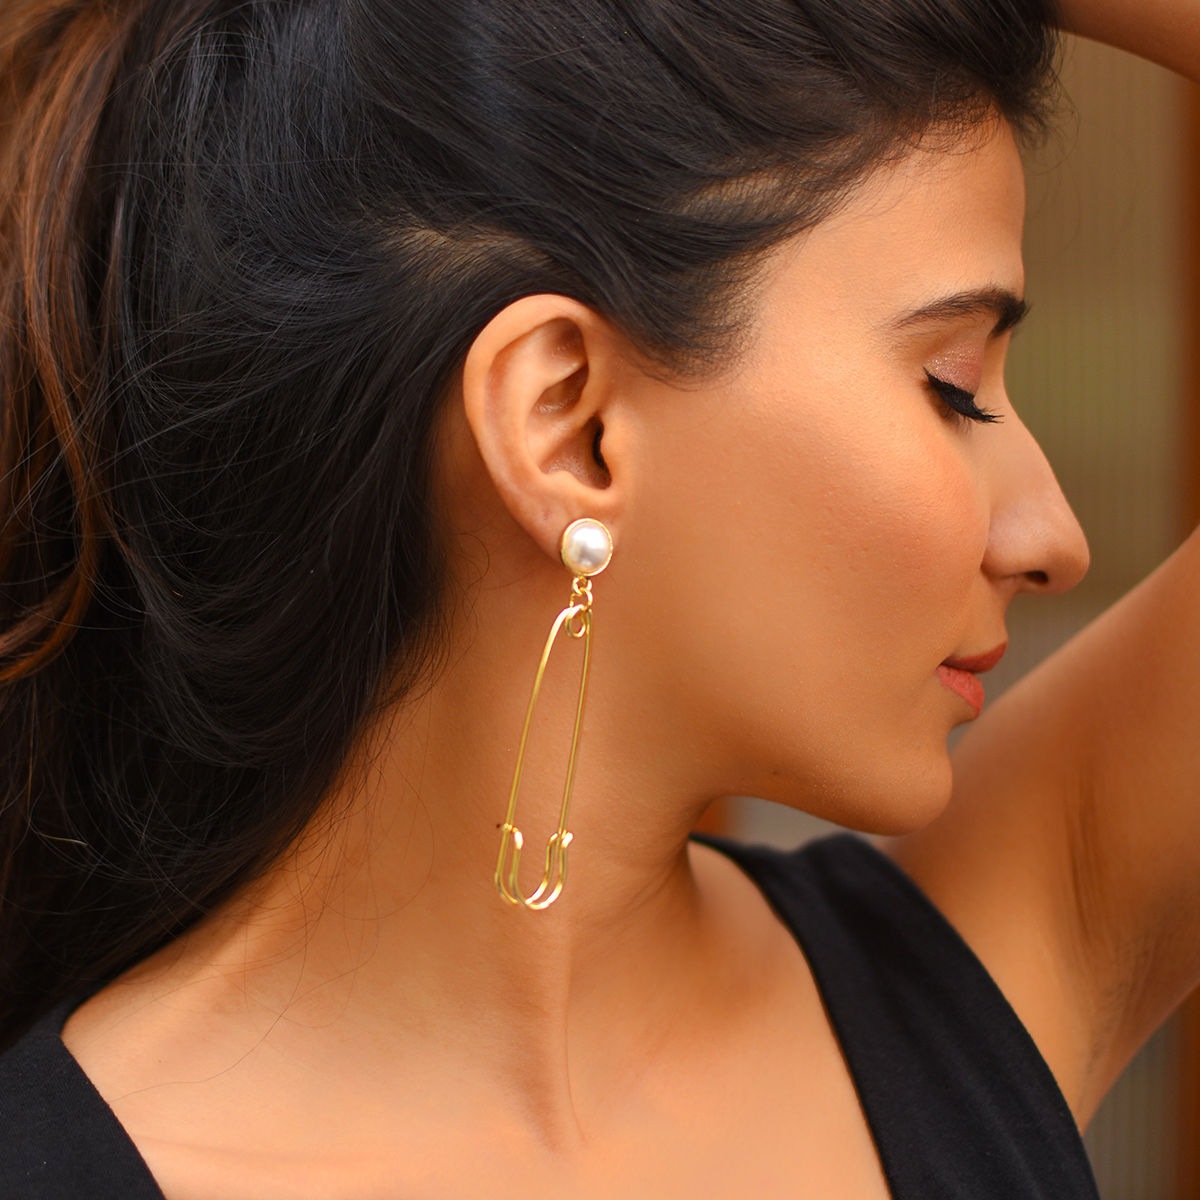 Top more than 82 pin earrings gold super hot